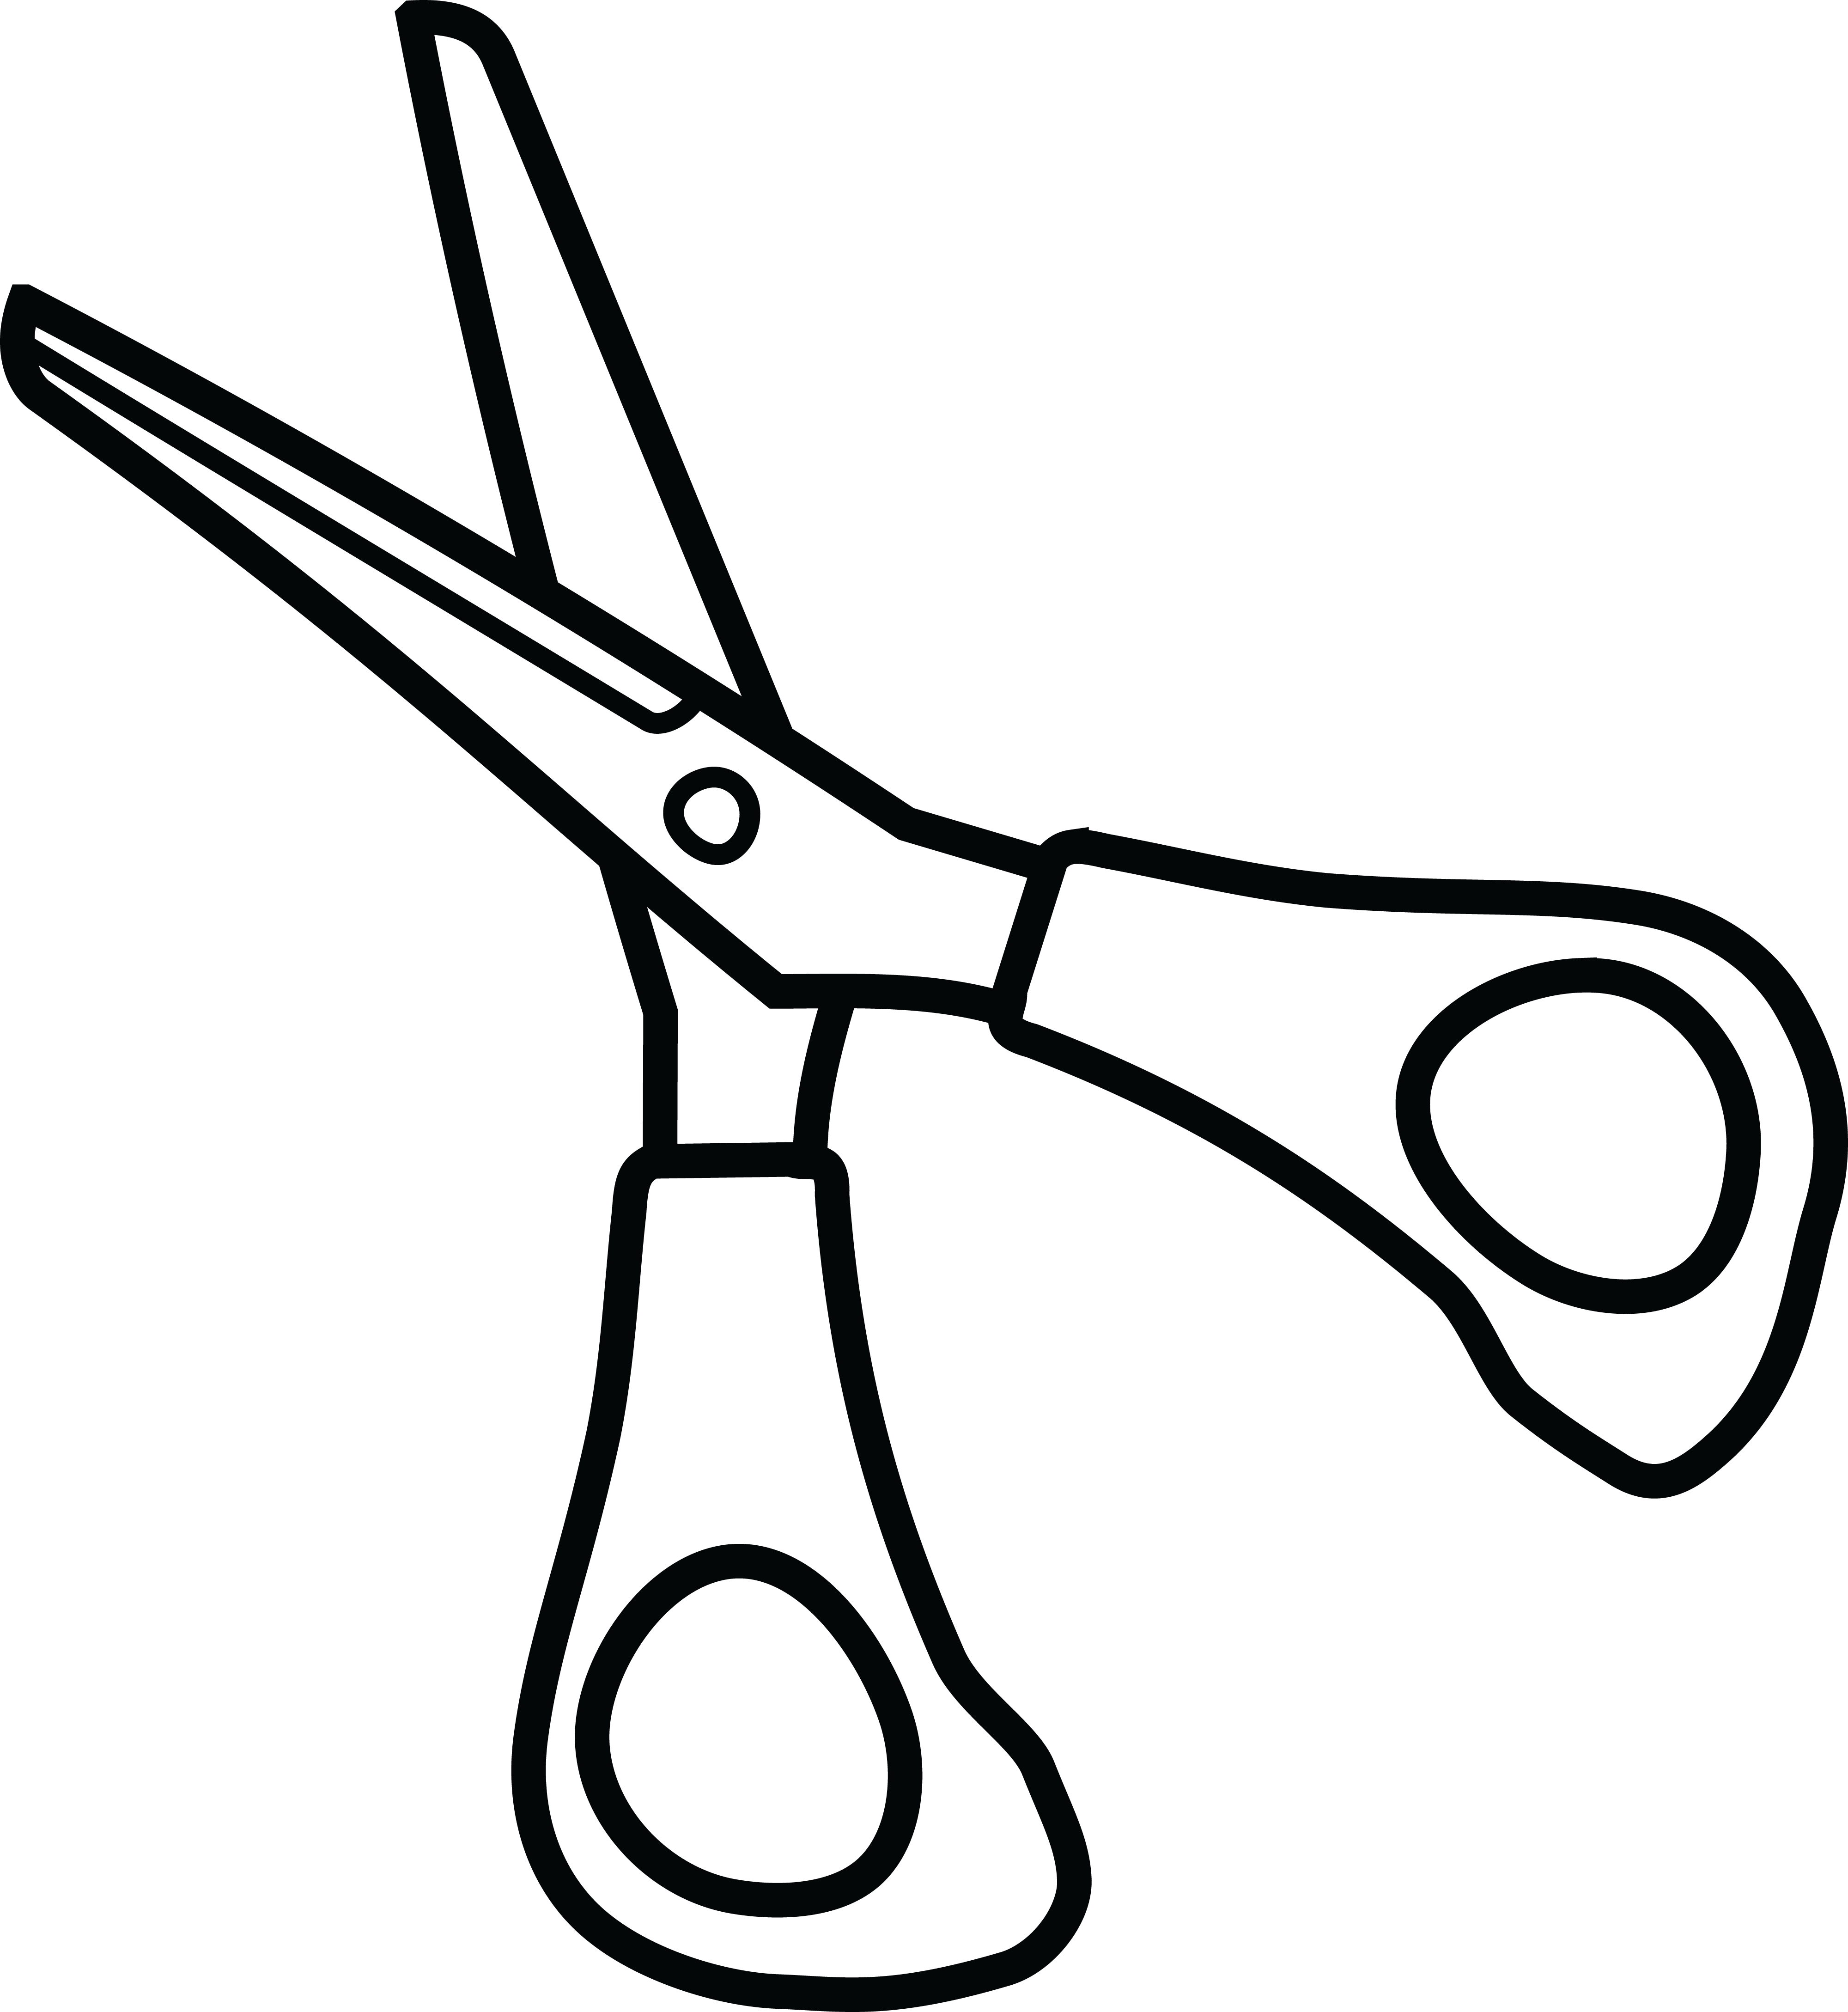 Clipart Of Scissors Free A Pa